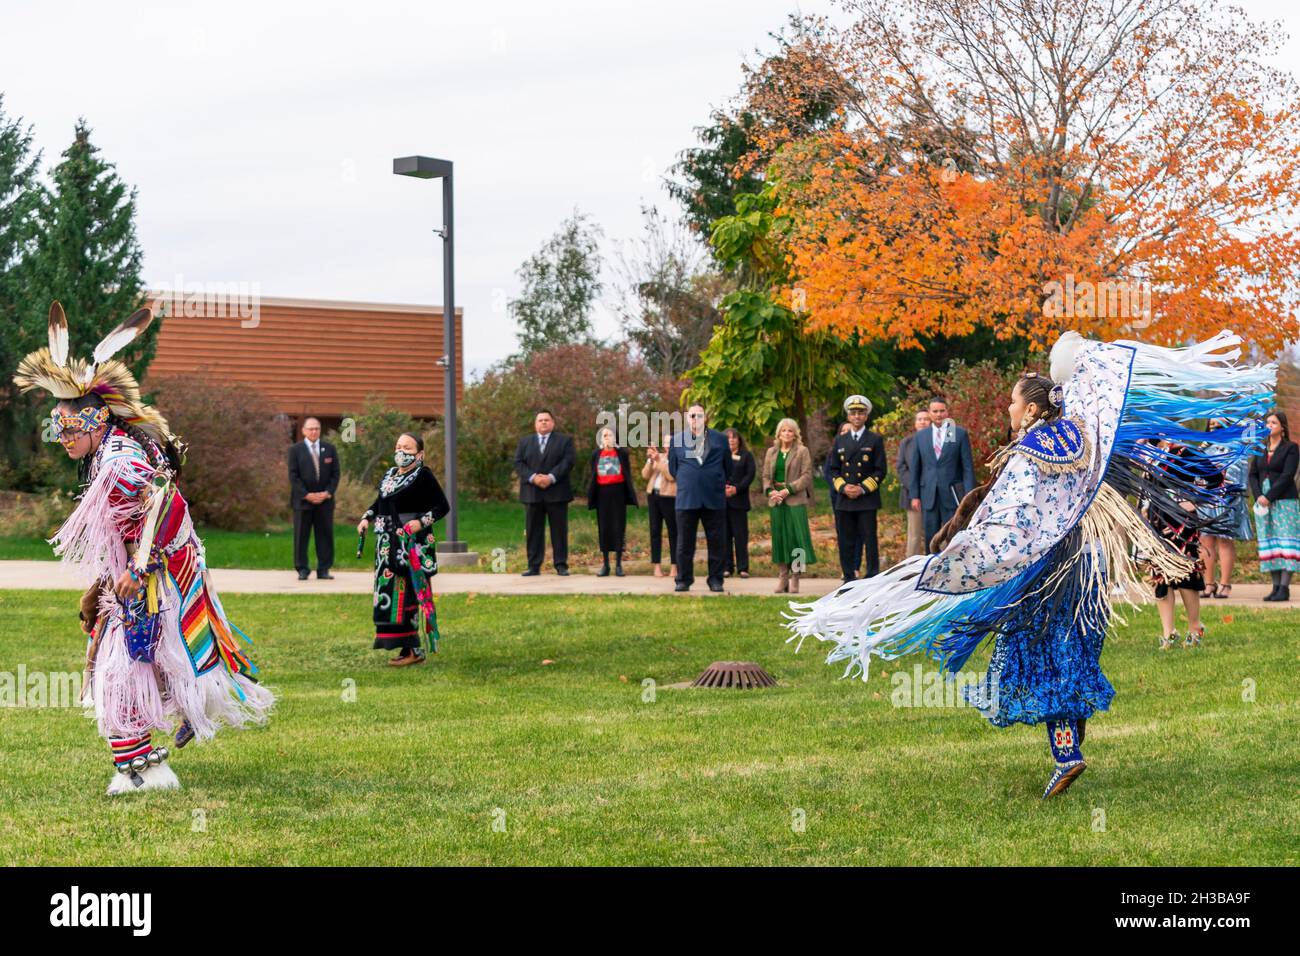 Mount Pleasant, United States of America. 24 October, 2021. U.S First Lady Dr. Jill Biden, center left, and Surgeon General Vivek Murthy, center right, watch a traditional dance performance during a visit to the Saginaw Chippewa Indian Tribe October 24, 2021 in Mount Pleasant, Michigan.  Credit: Erin Scott/White House Photo/Alamy Live News Stock Photo